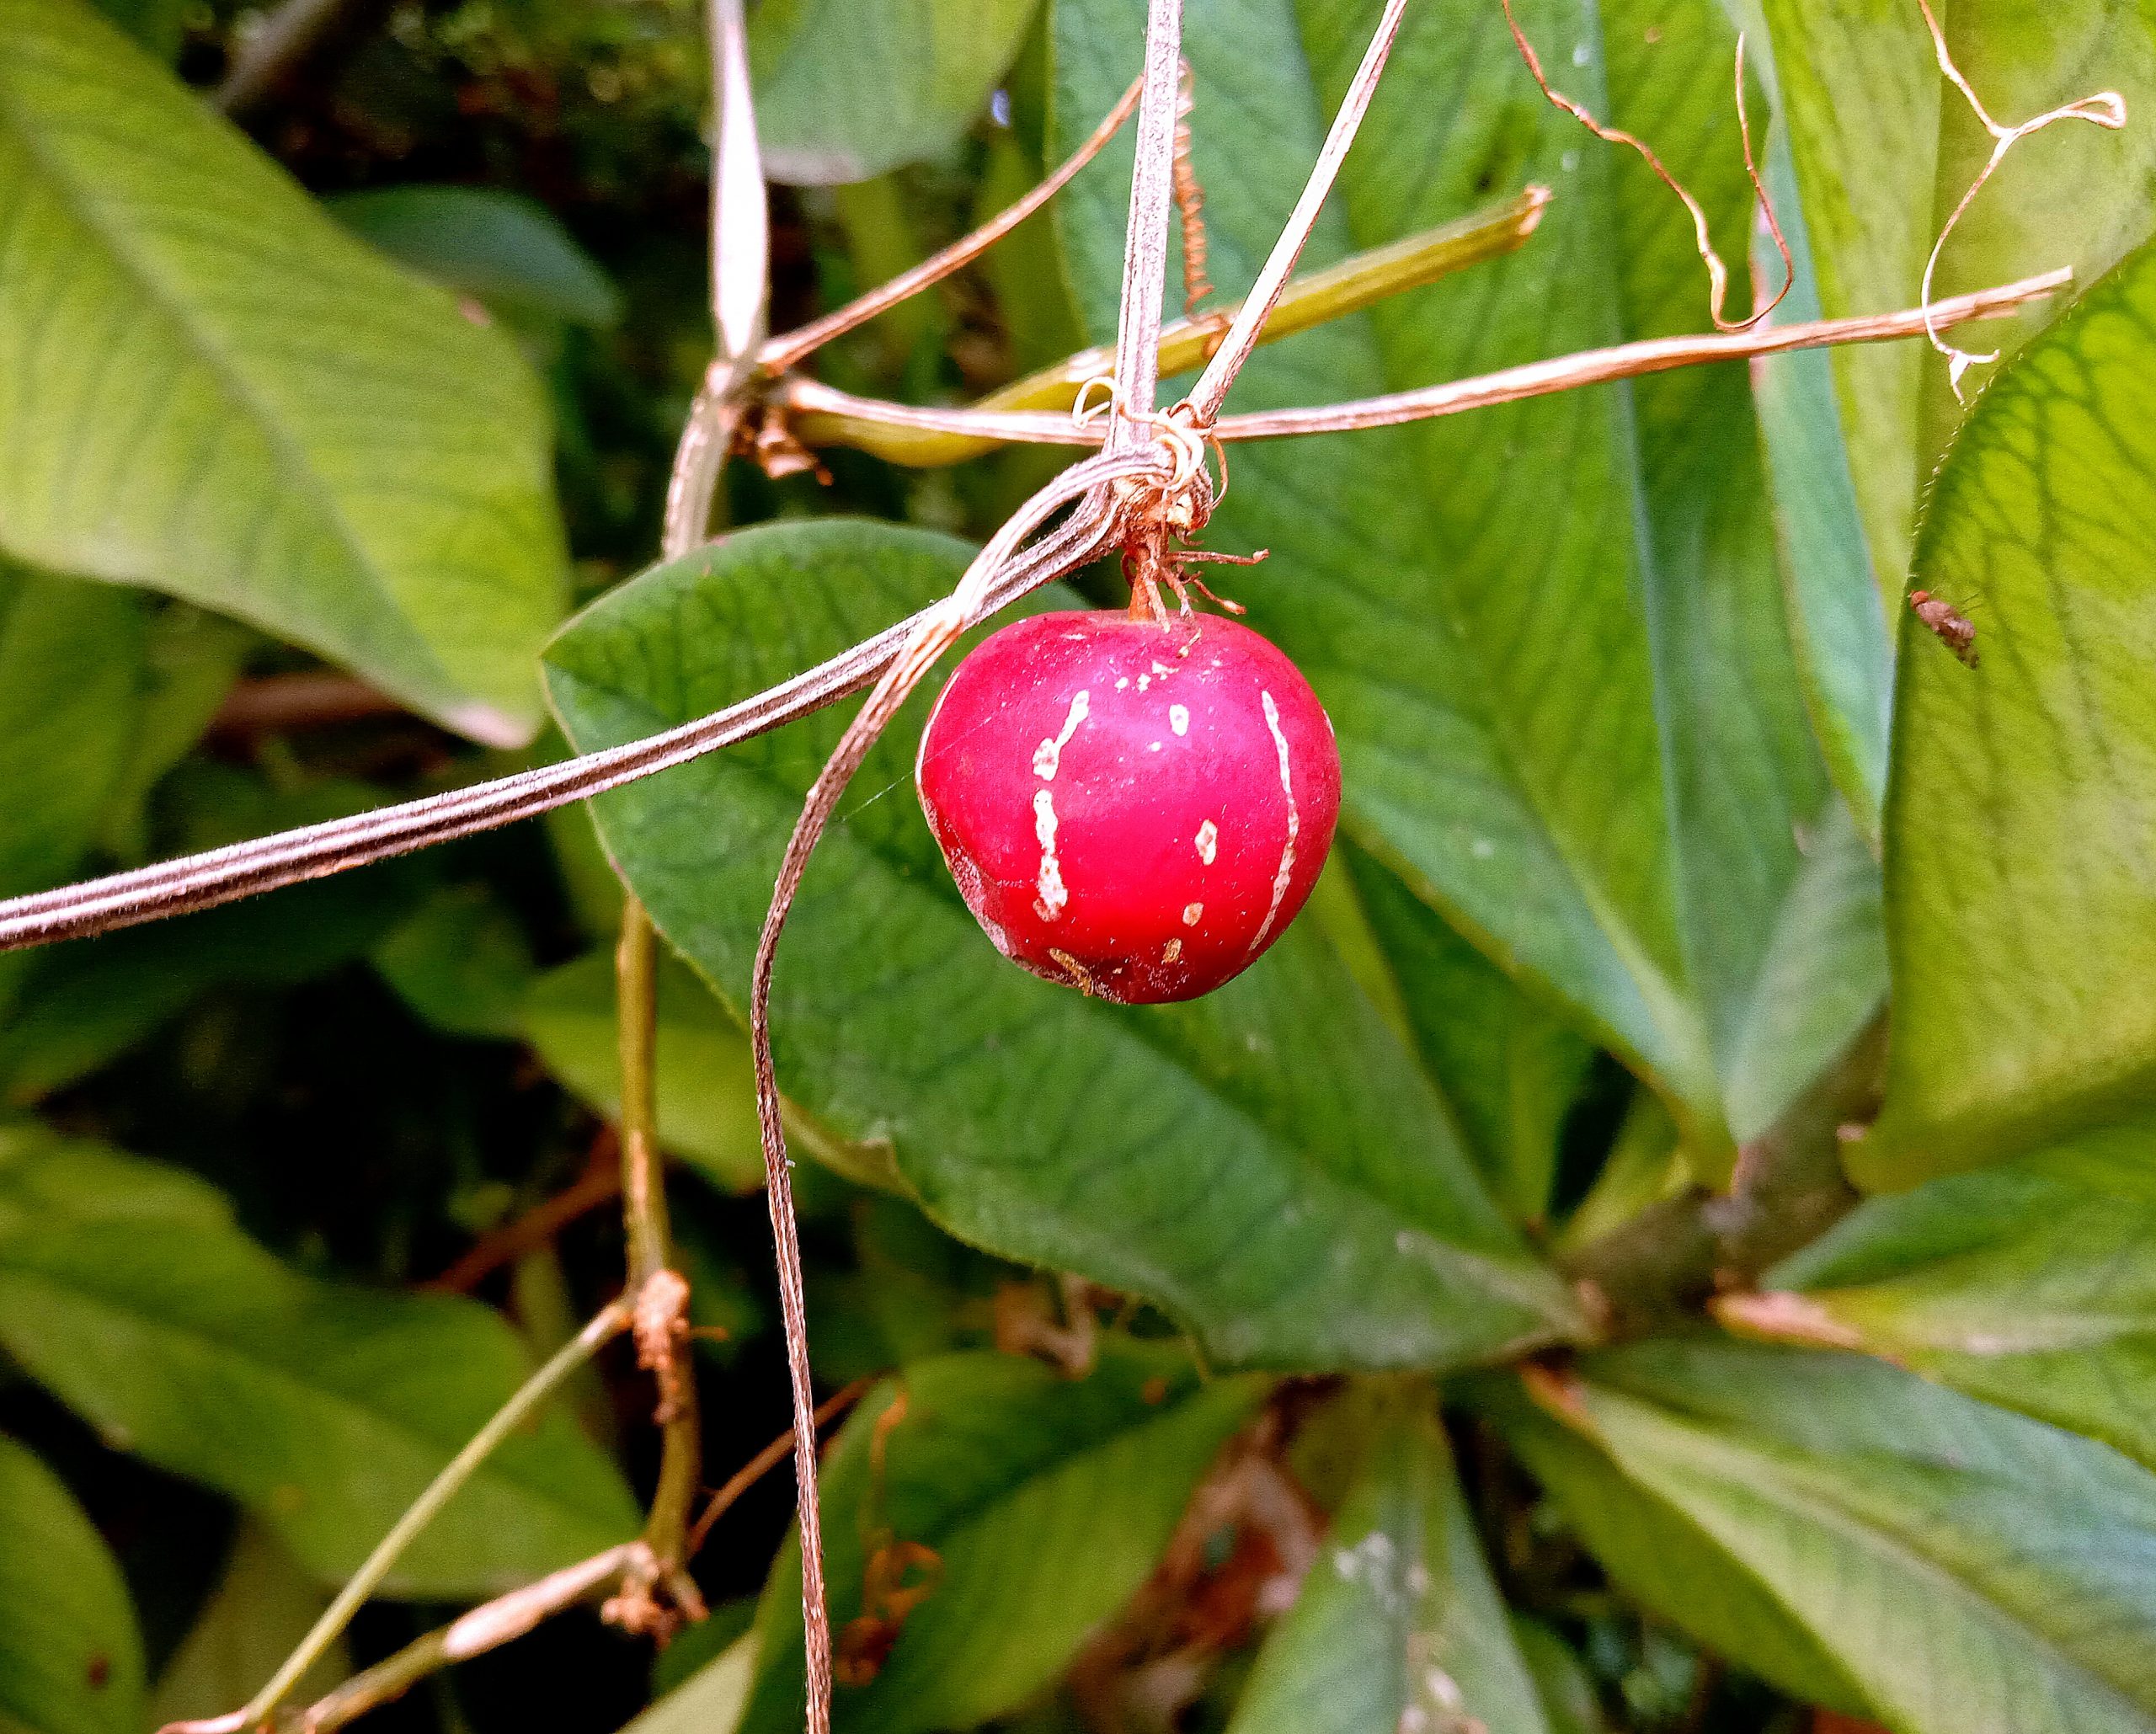 Pink fruit on plant